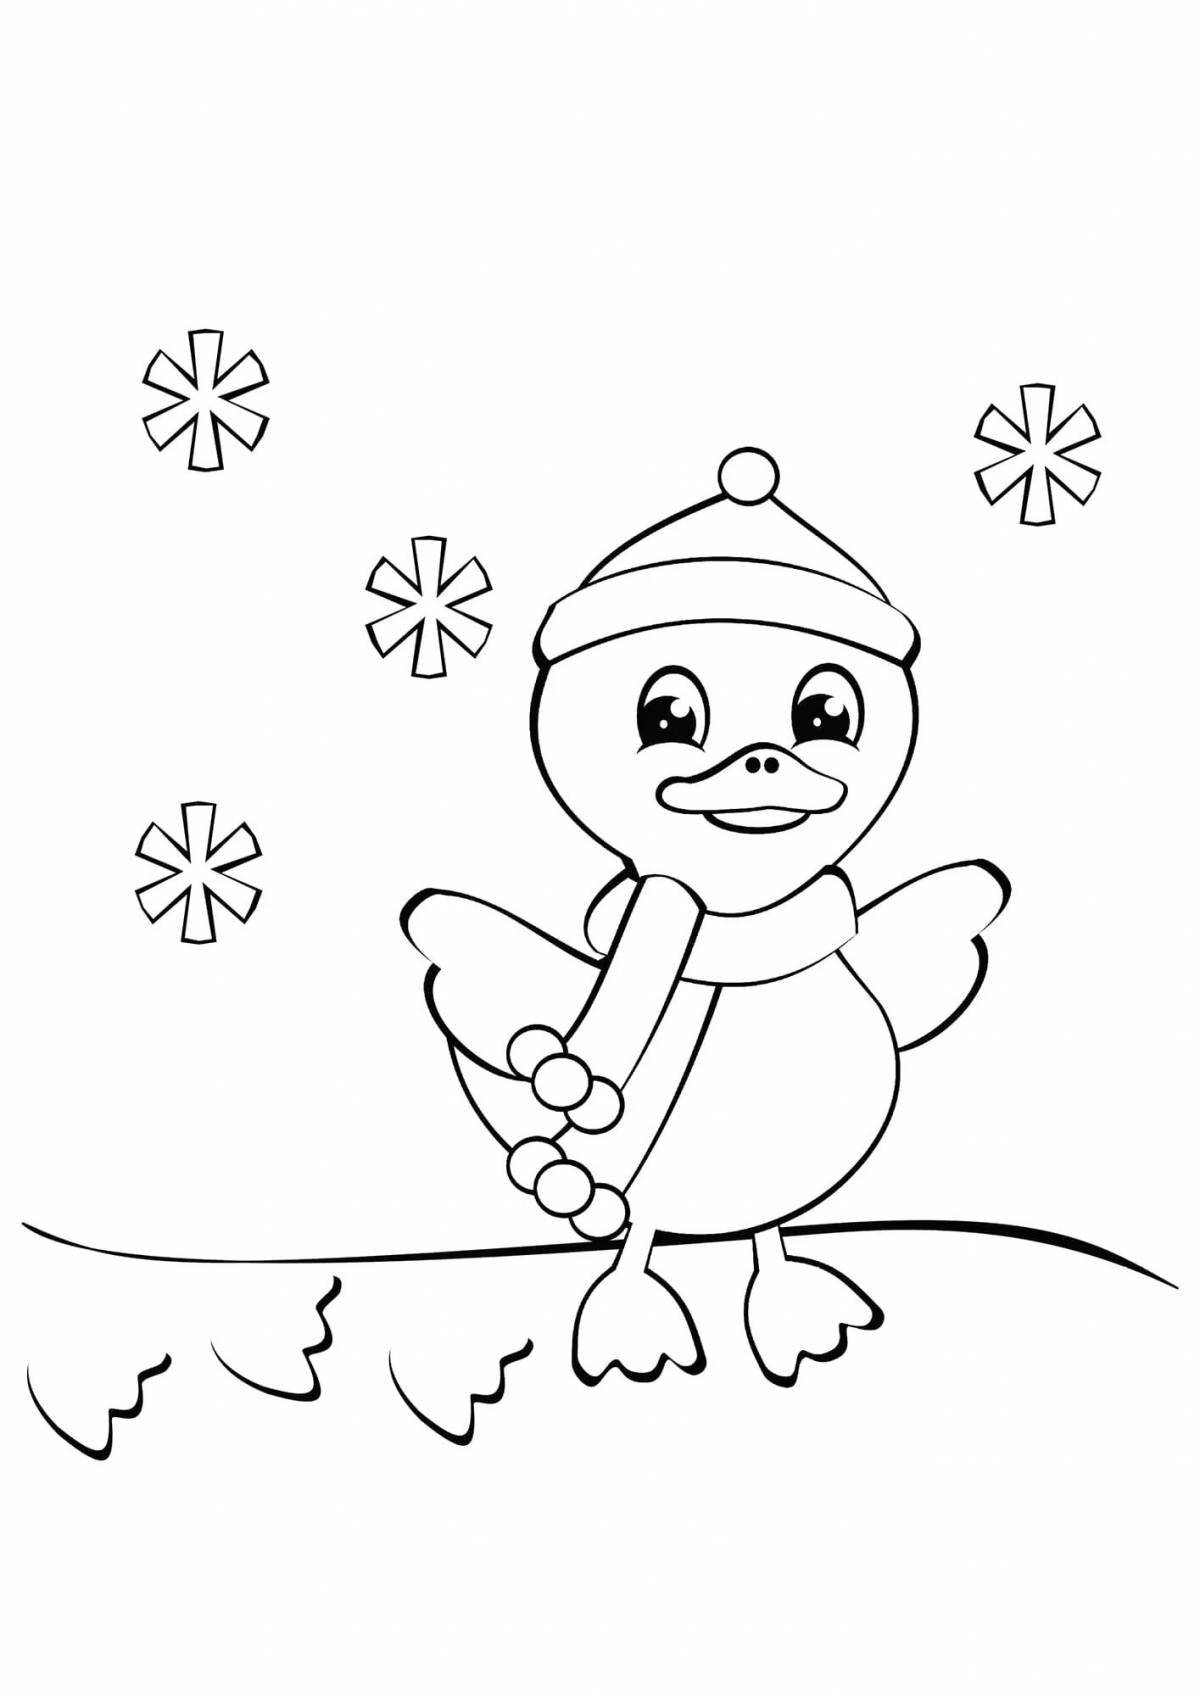 Exciting winter coloring book for children 3-4 years old